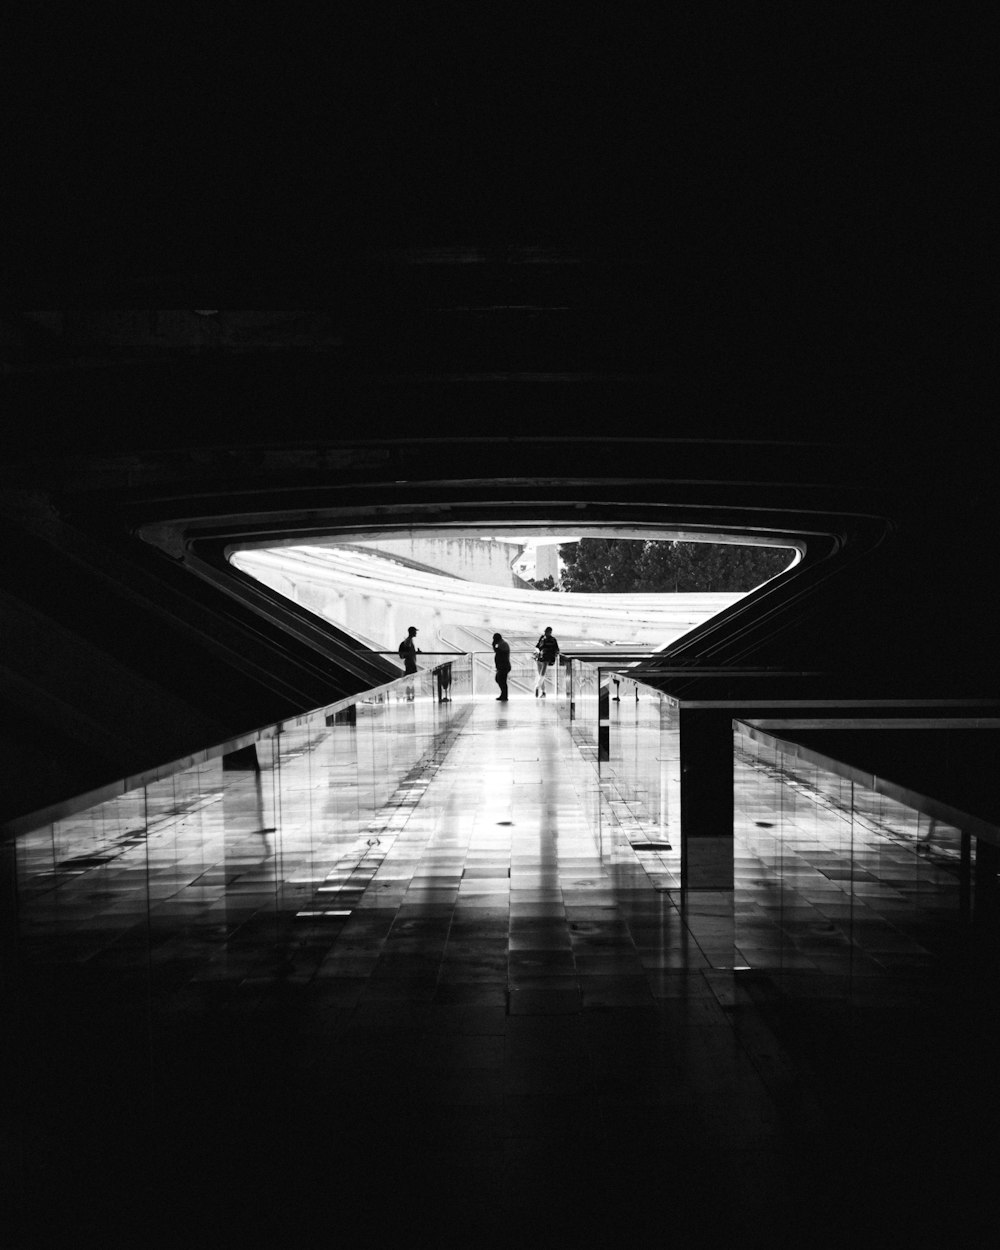 a black and white photo of people walking through a tunnel